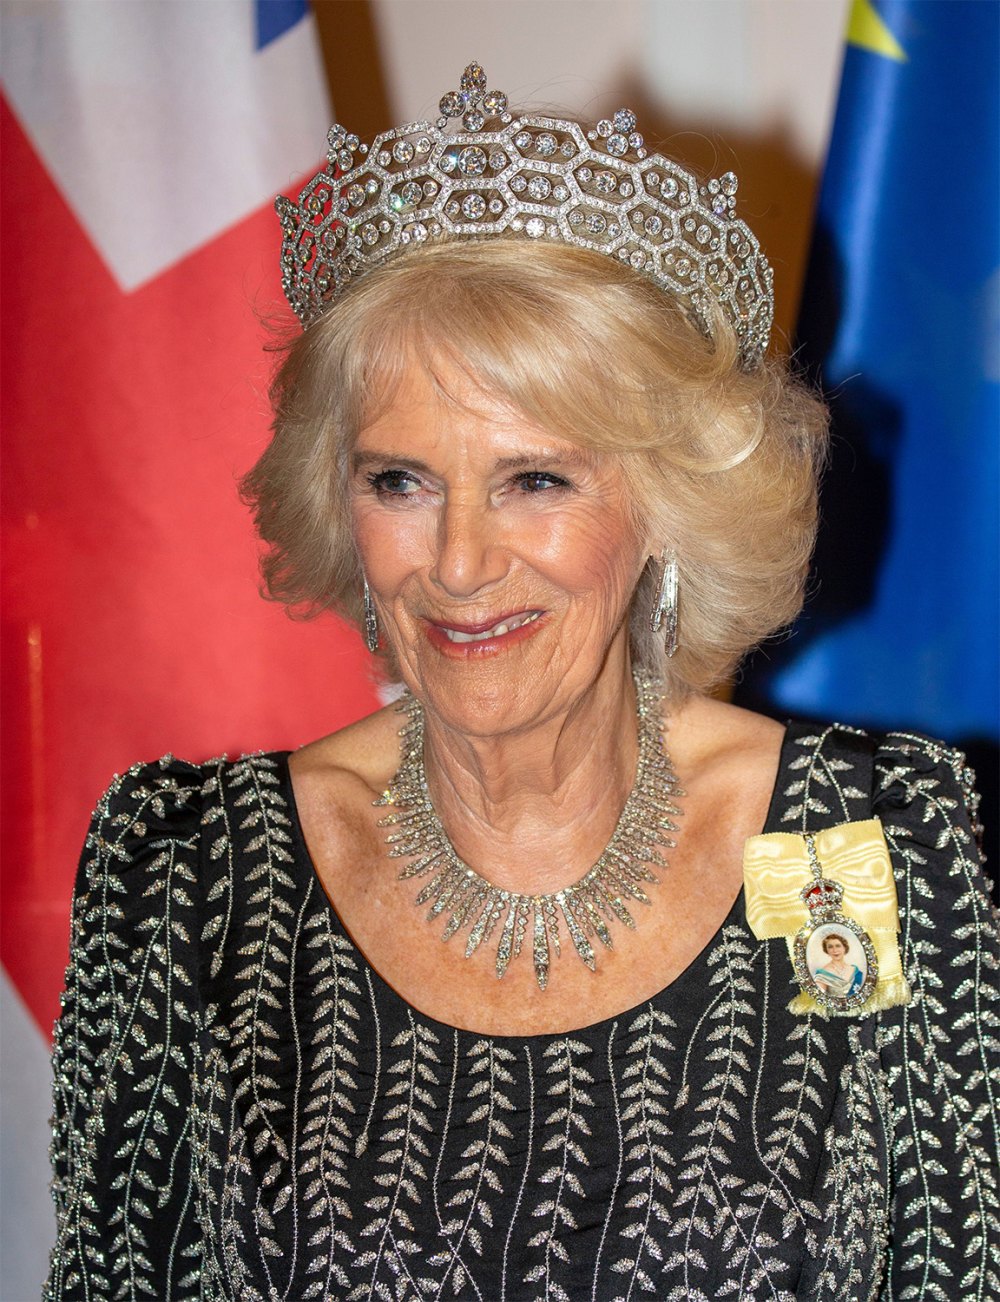 Queen Consort Camilla Beams in Boucheron Diamond Tiara at State Banquet in Germany, Honors Queen Elizabeth II With Jewels